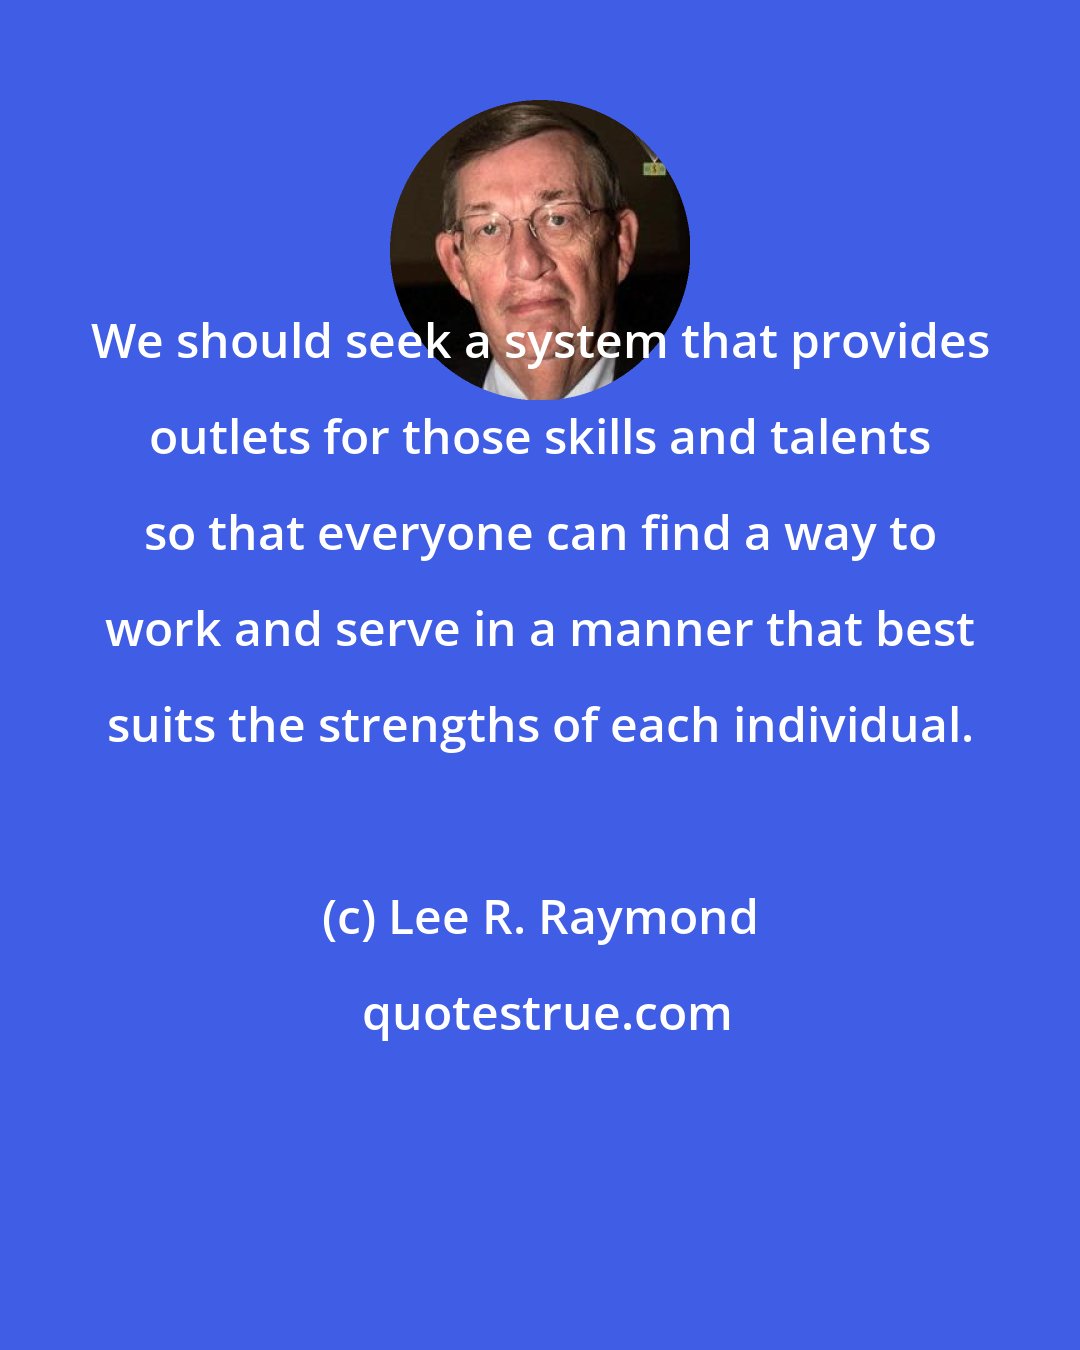 Lee R. Raymond: We should seek a system that provides outlets for those skills and talents so that everyone can find a way to work and serve in a manner that best suits the strengths of each individual.